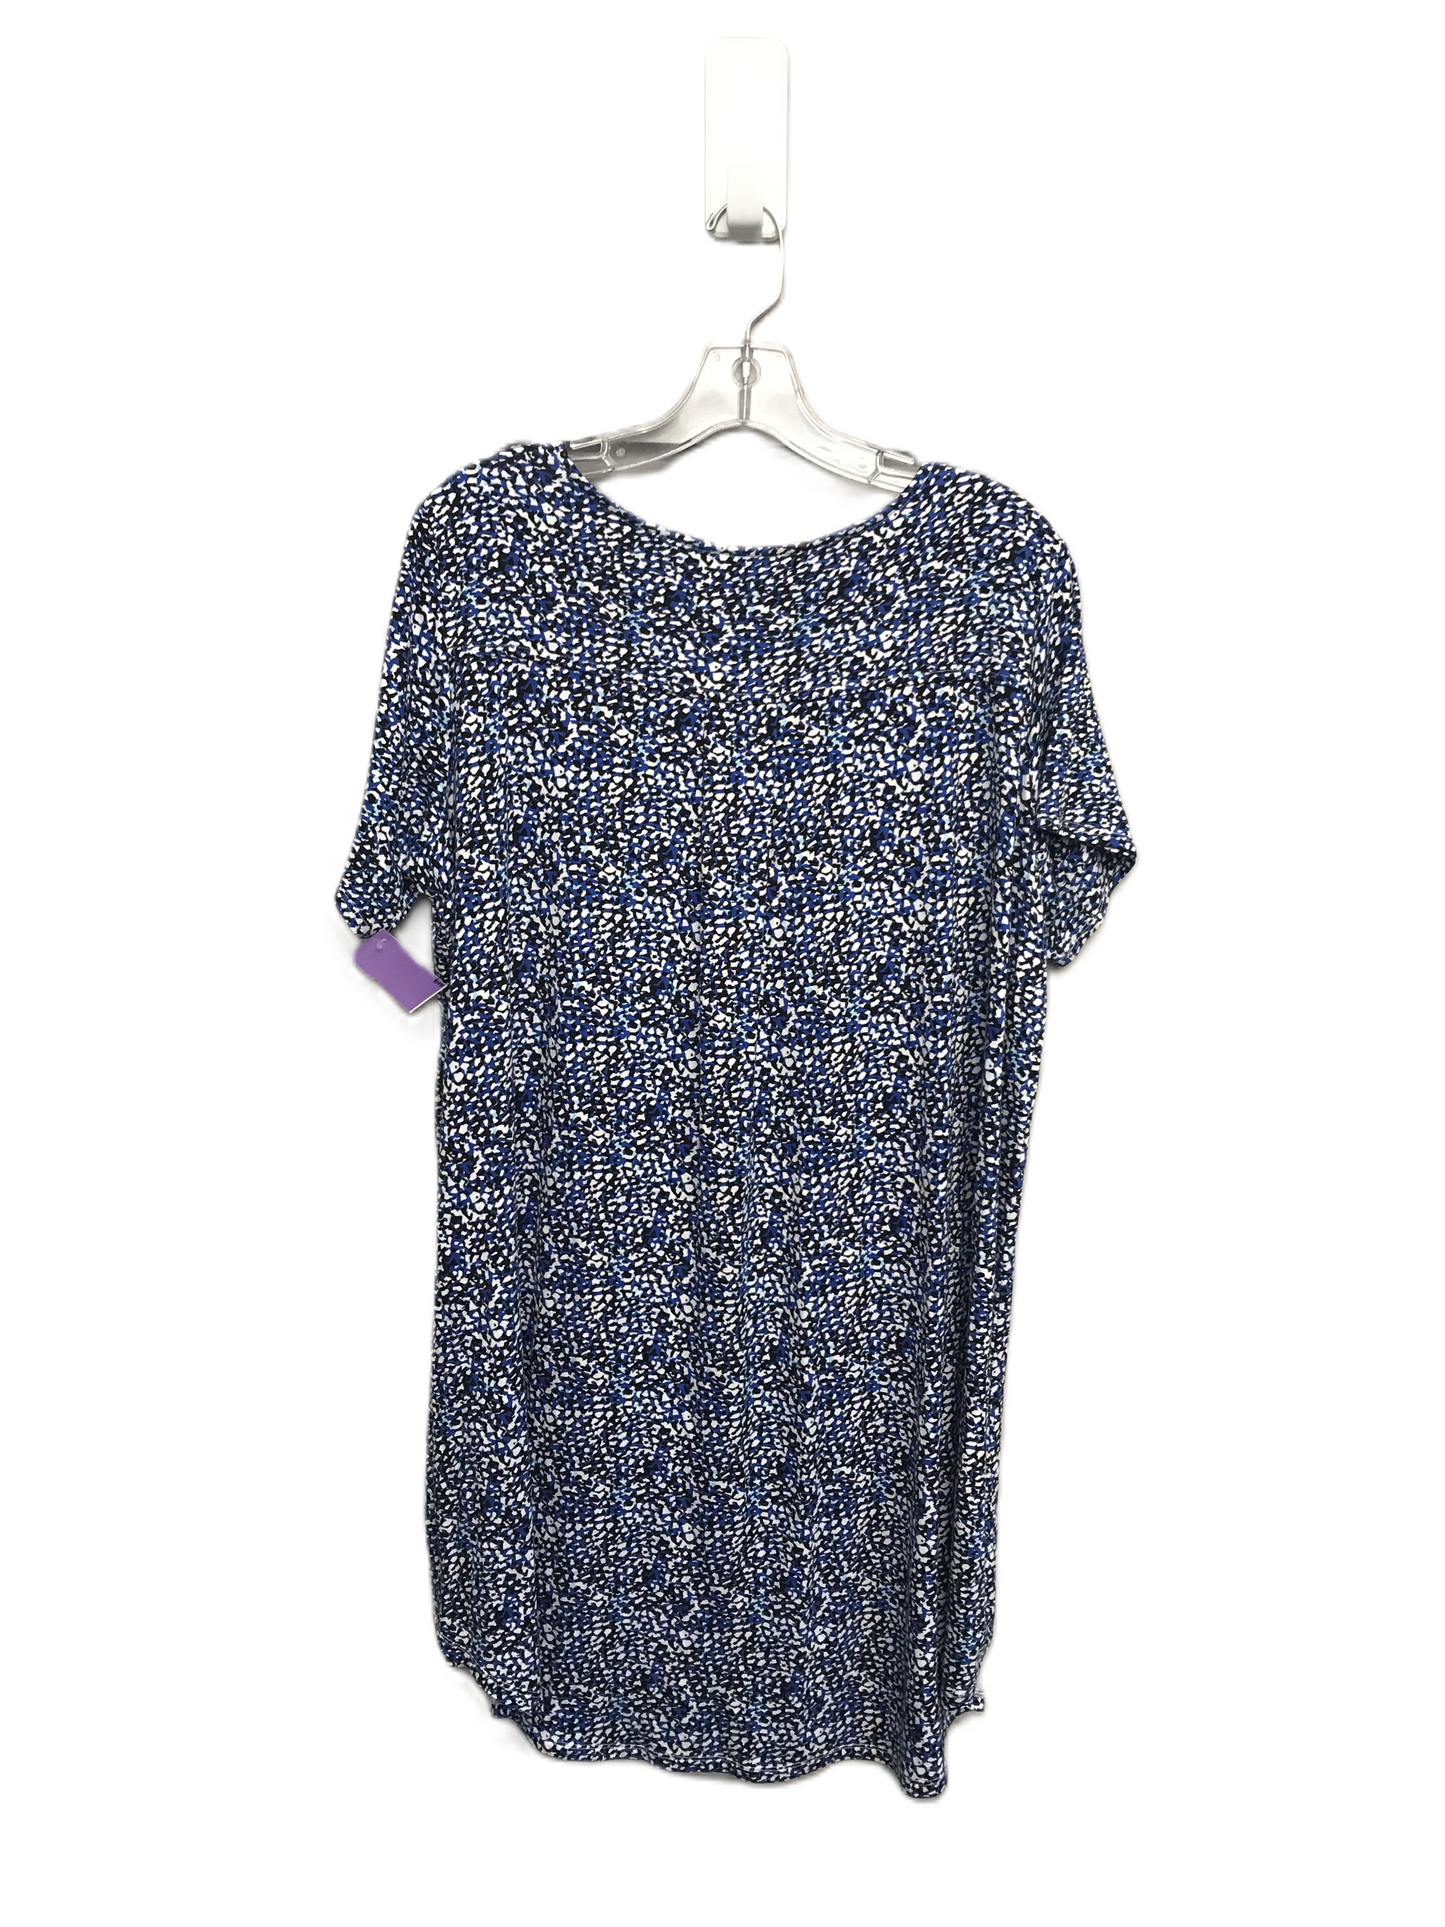 Blue & White Dress Casual Short By Tahari By Arthur Levine, Size: 1x